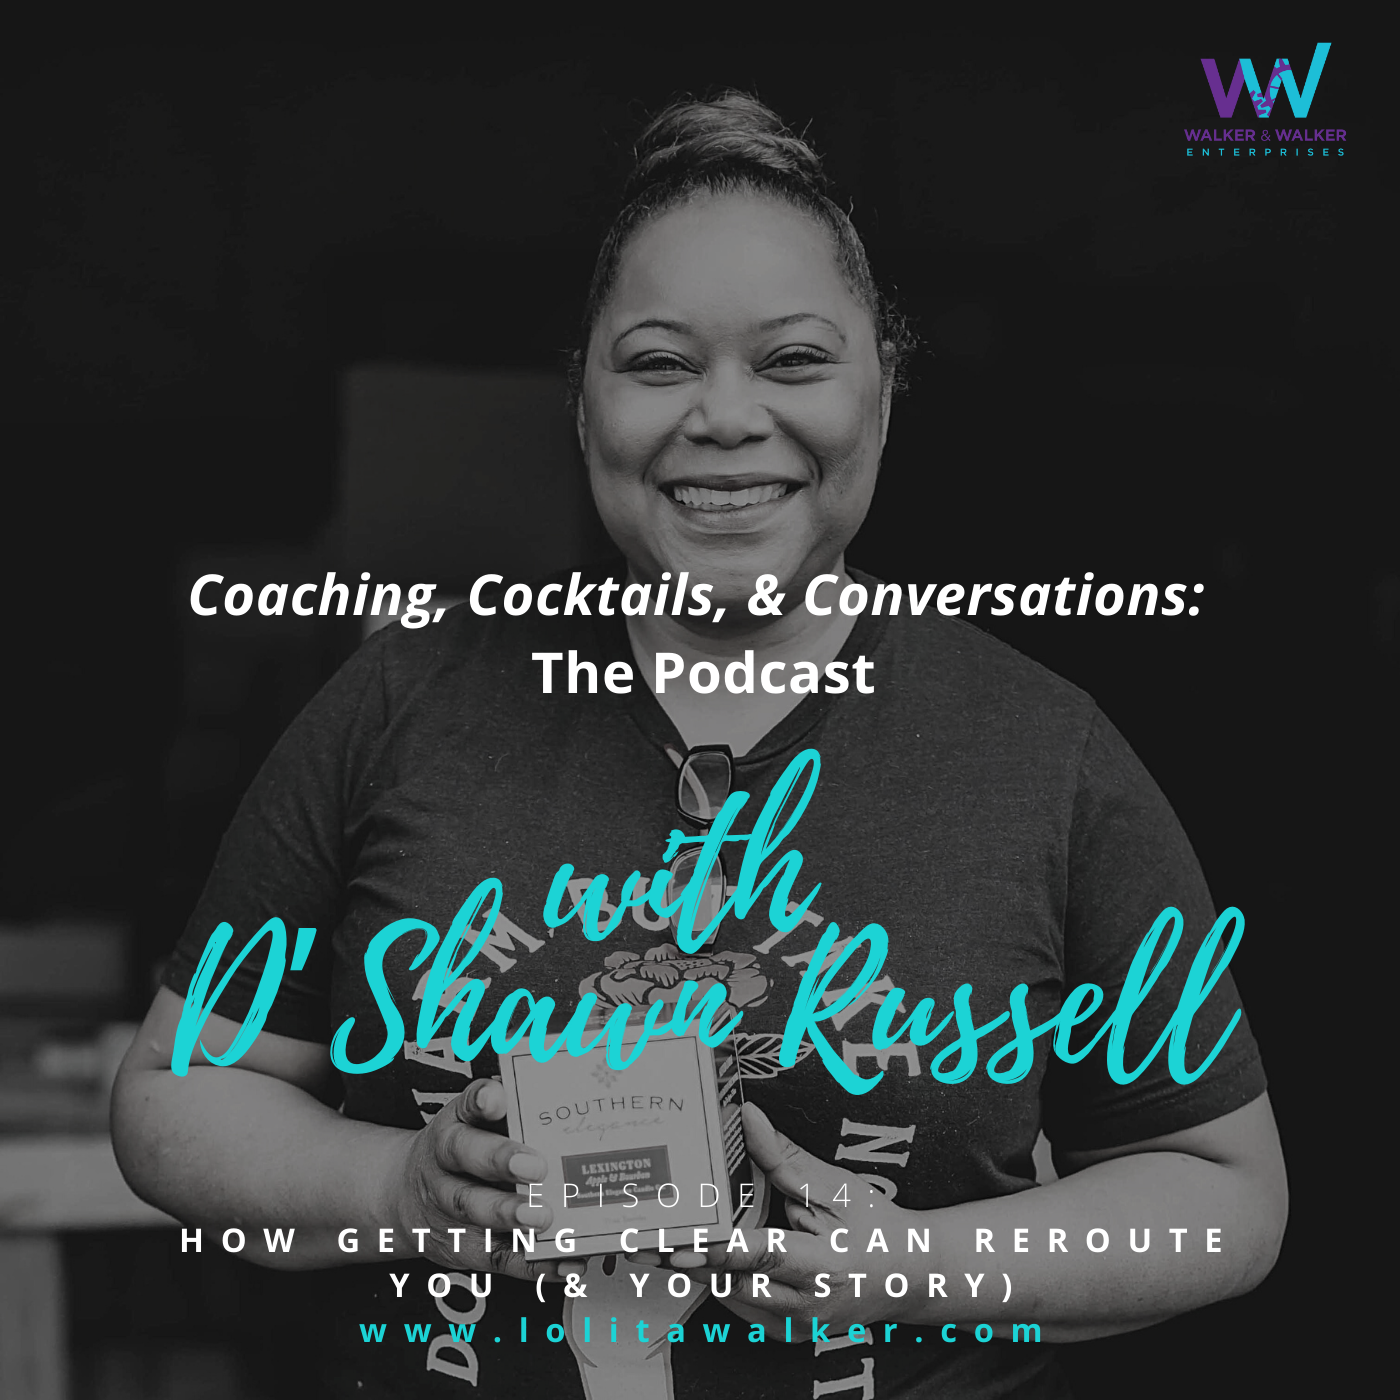 S1E14 - How Getting Clear Can Reroute You & Your Story (with D&#39;Shawn Russell)